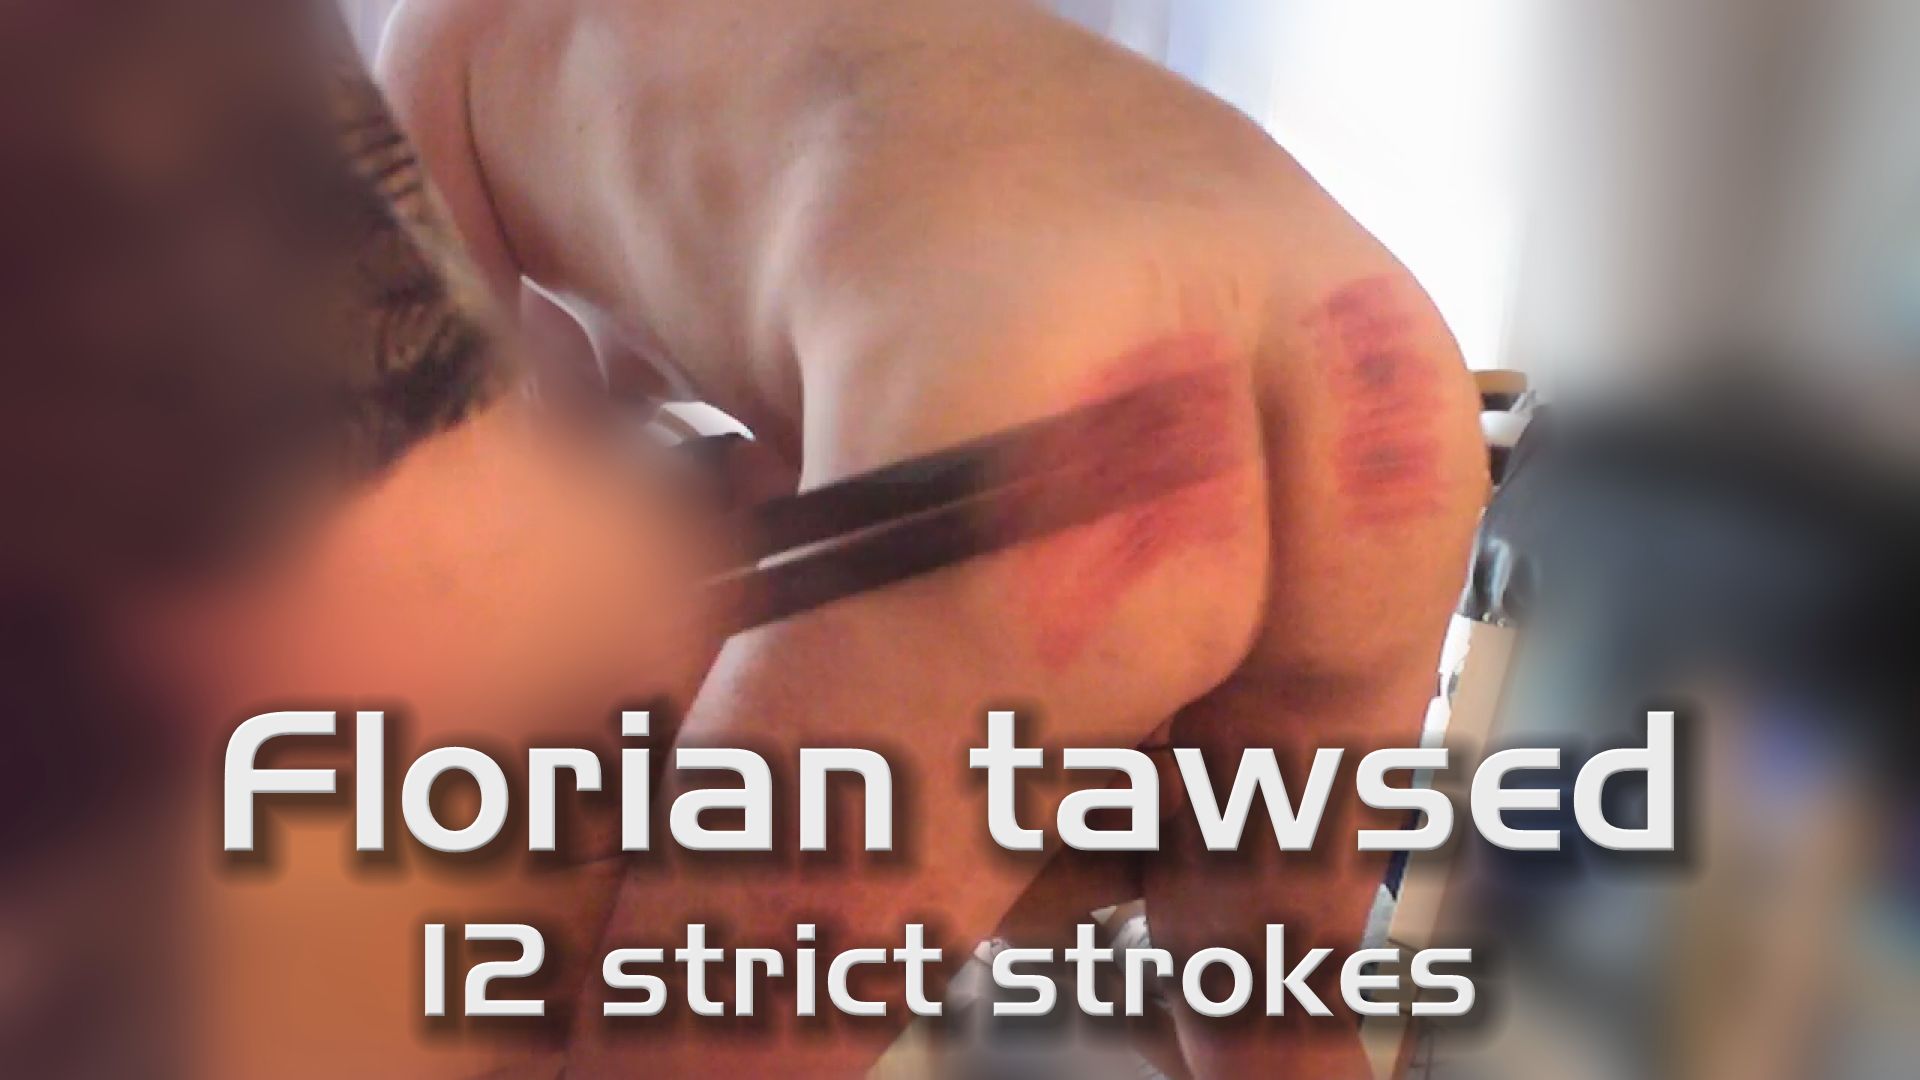 Florian gets a thrashing (2) - the tawse second